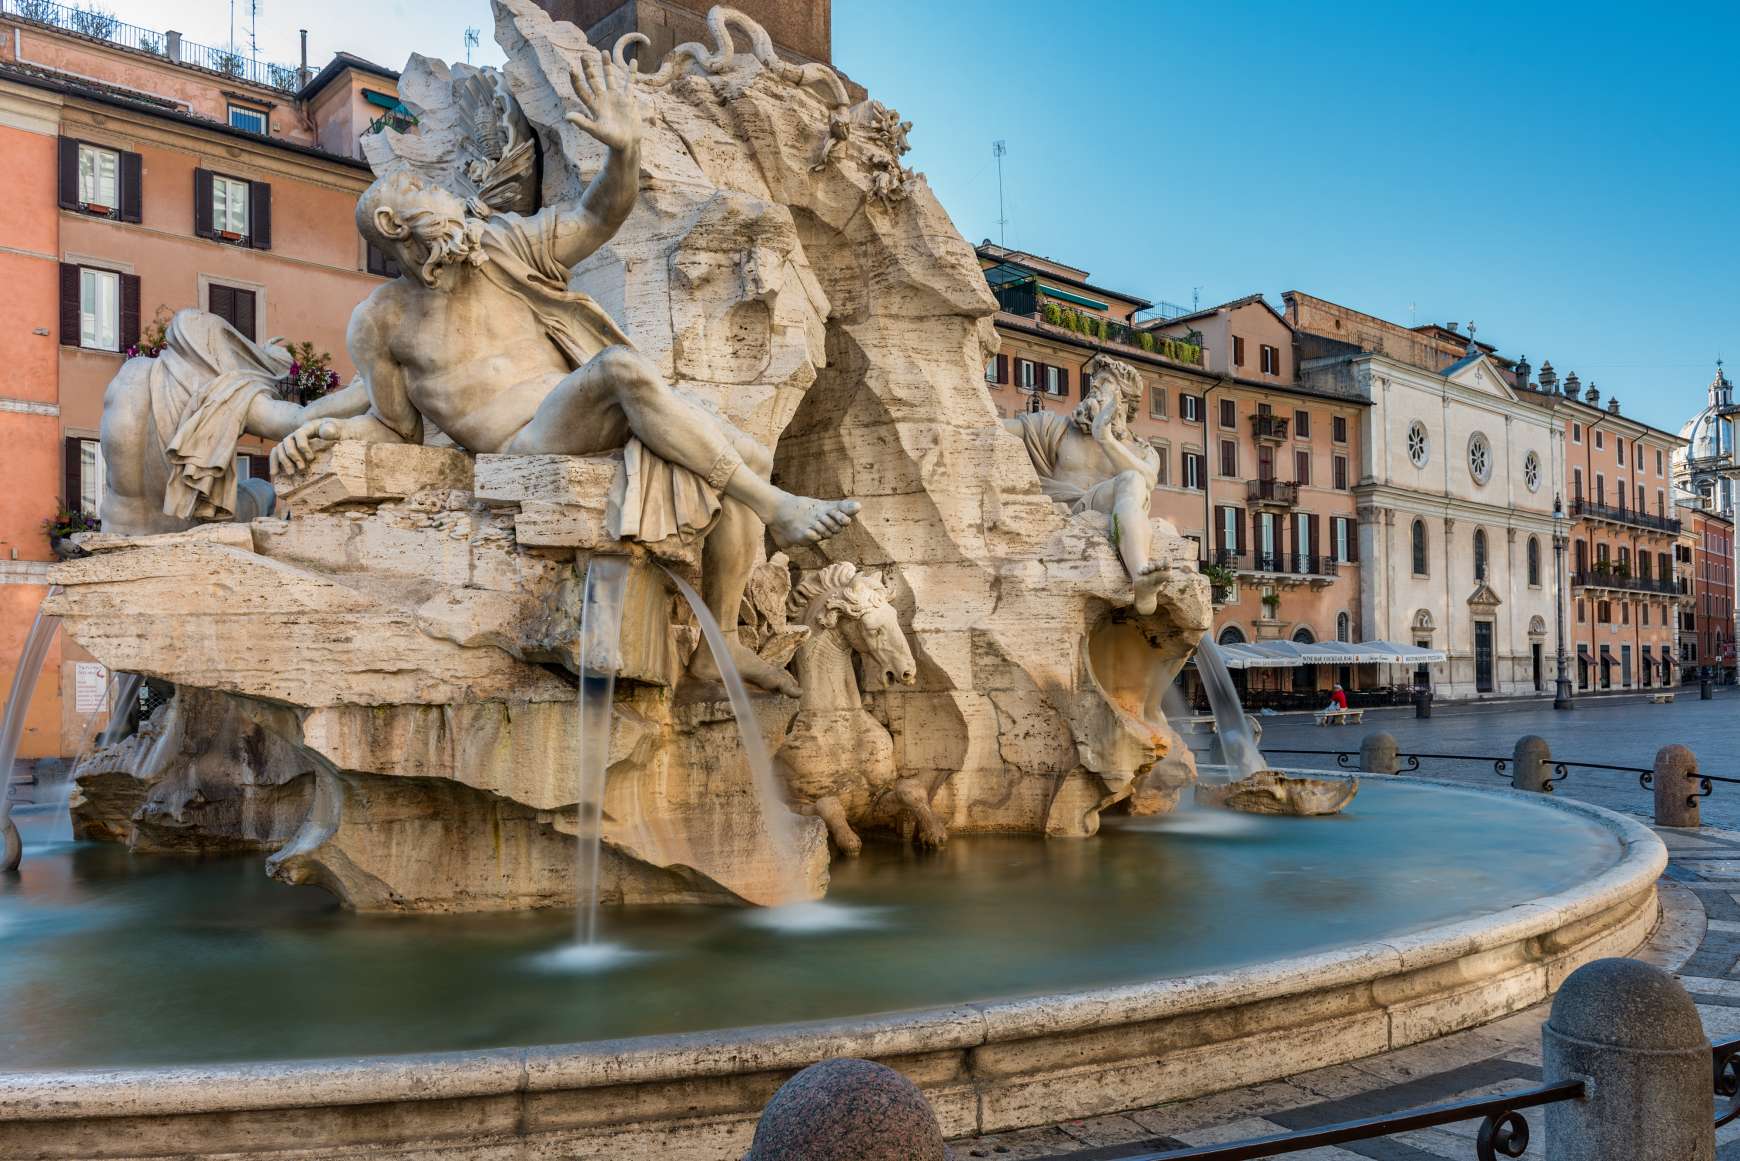 Closeup view of fountain at Piazza Navona in Rome